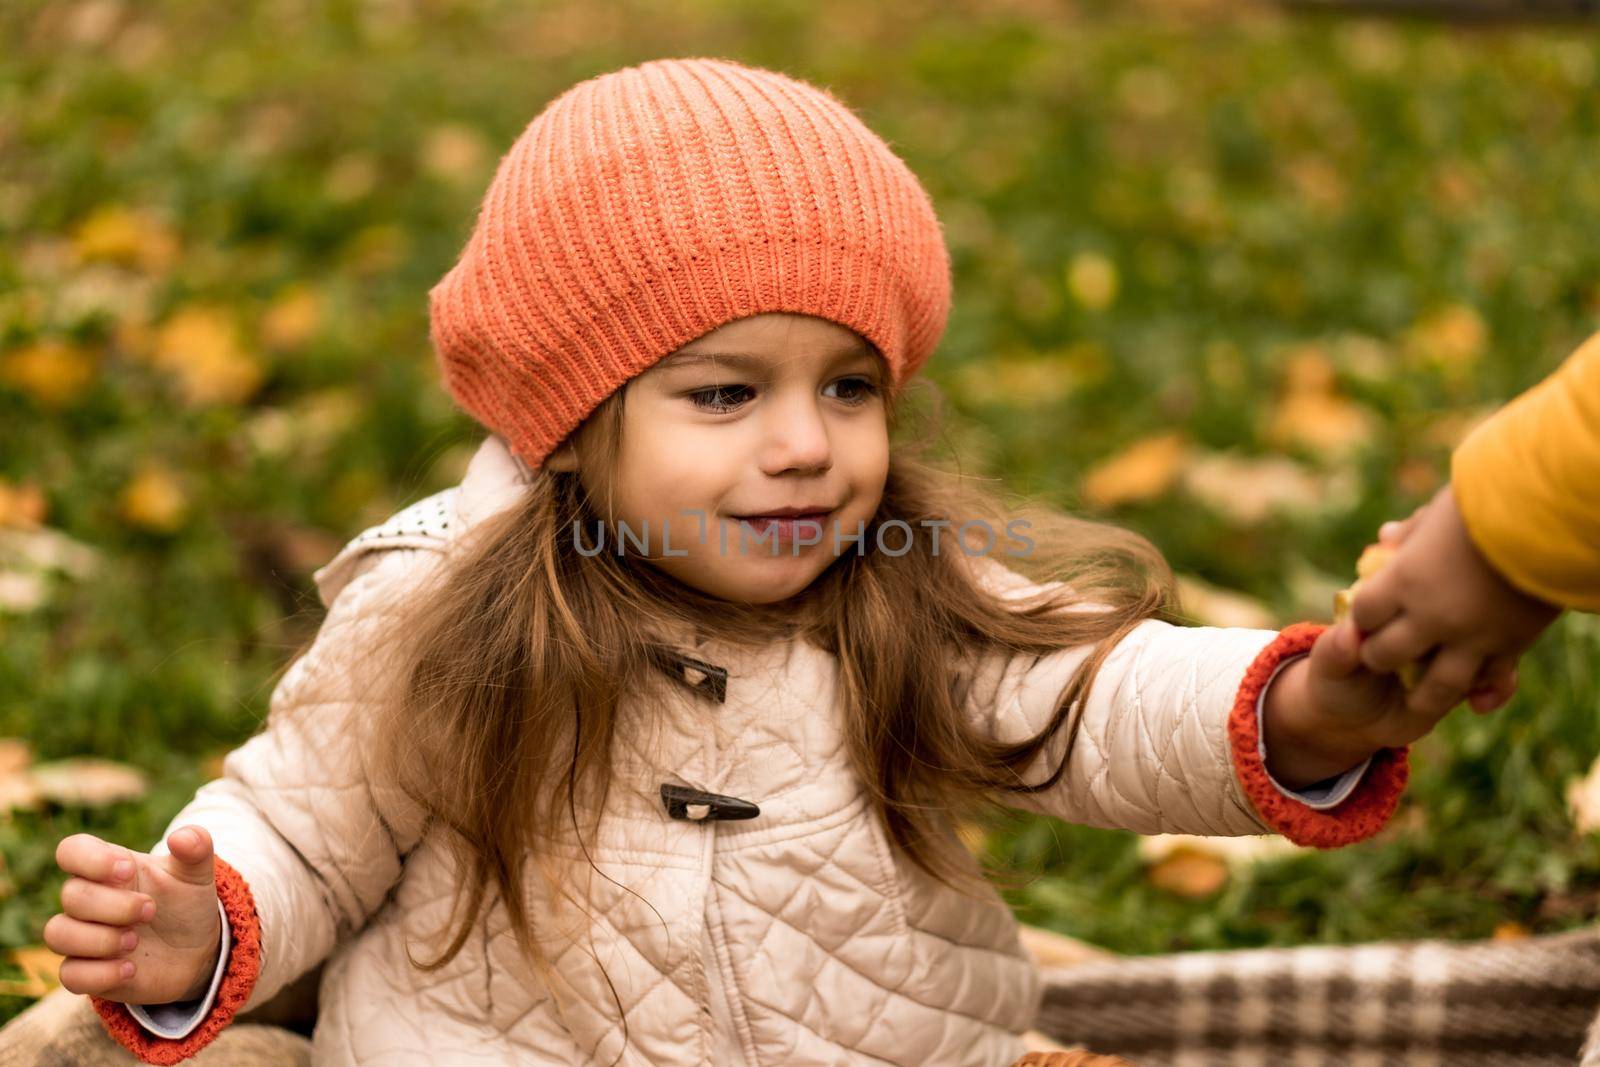 Portrait Of Little Cute Preschool Minor Girl In Orange Beret On Yellow Fallen Leaves Takes Apple From Someone Looks Away At Cold Weather In Fall Park. Childhood, Family, Motherhood, Autumn Concept by mytrykau